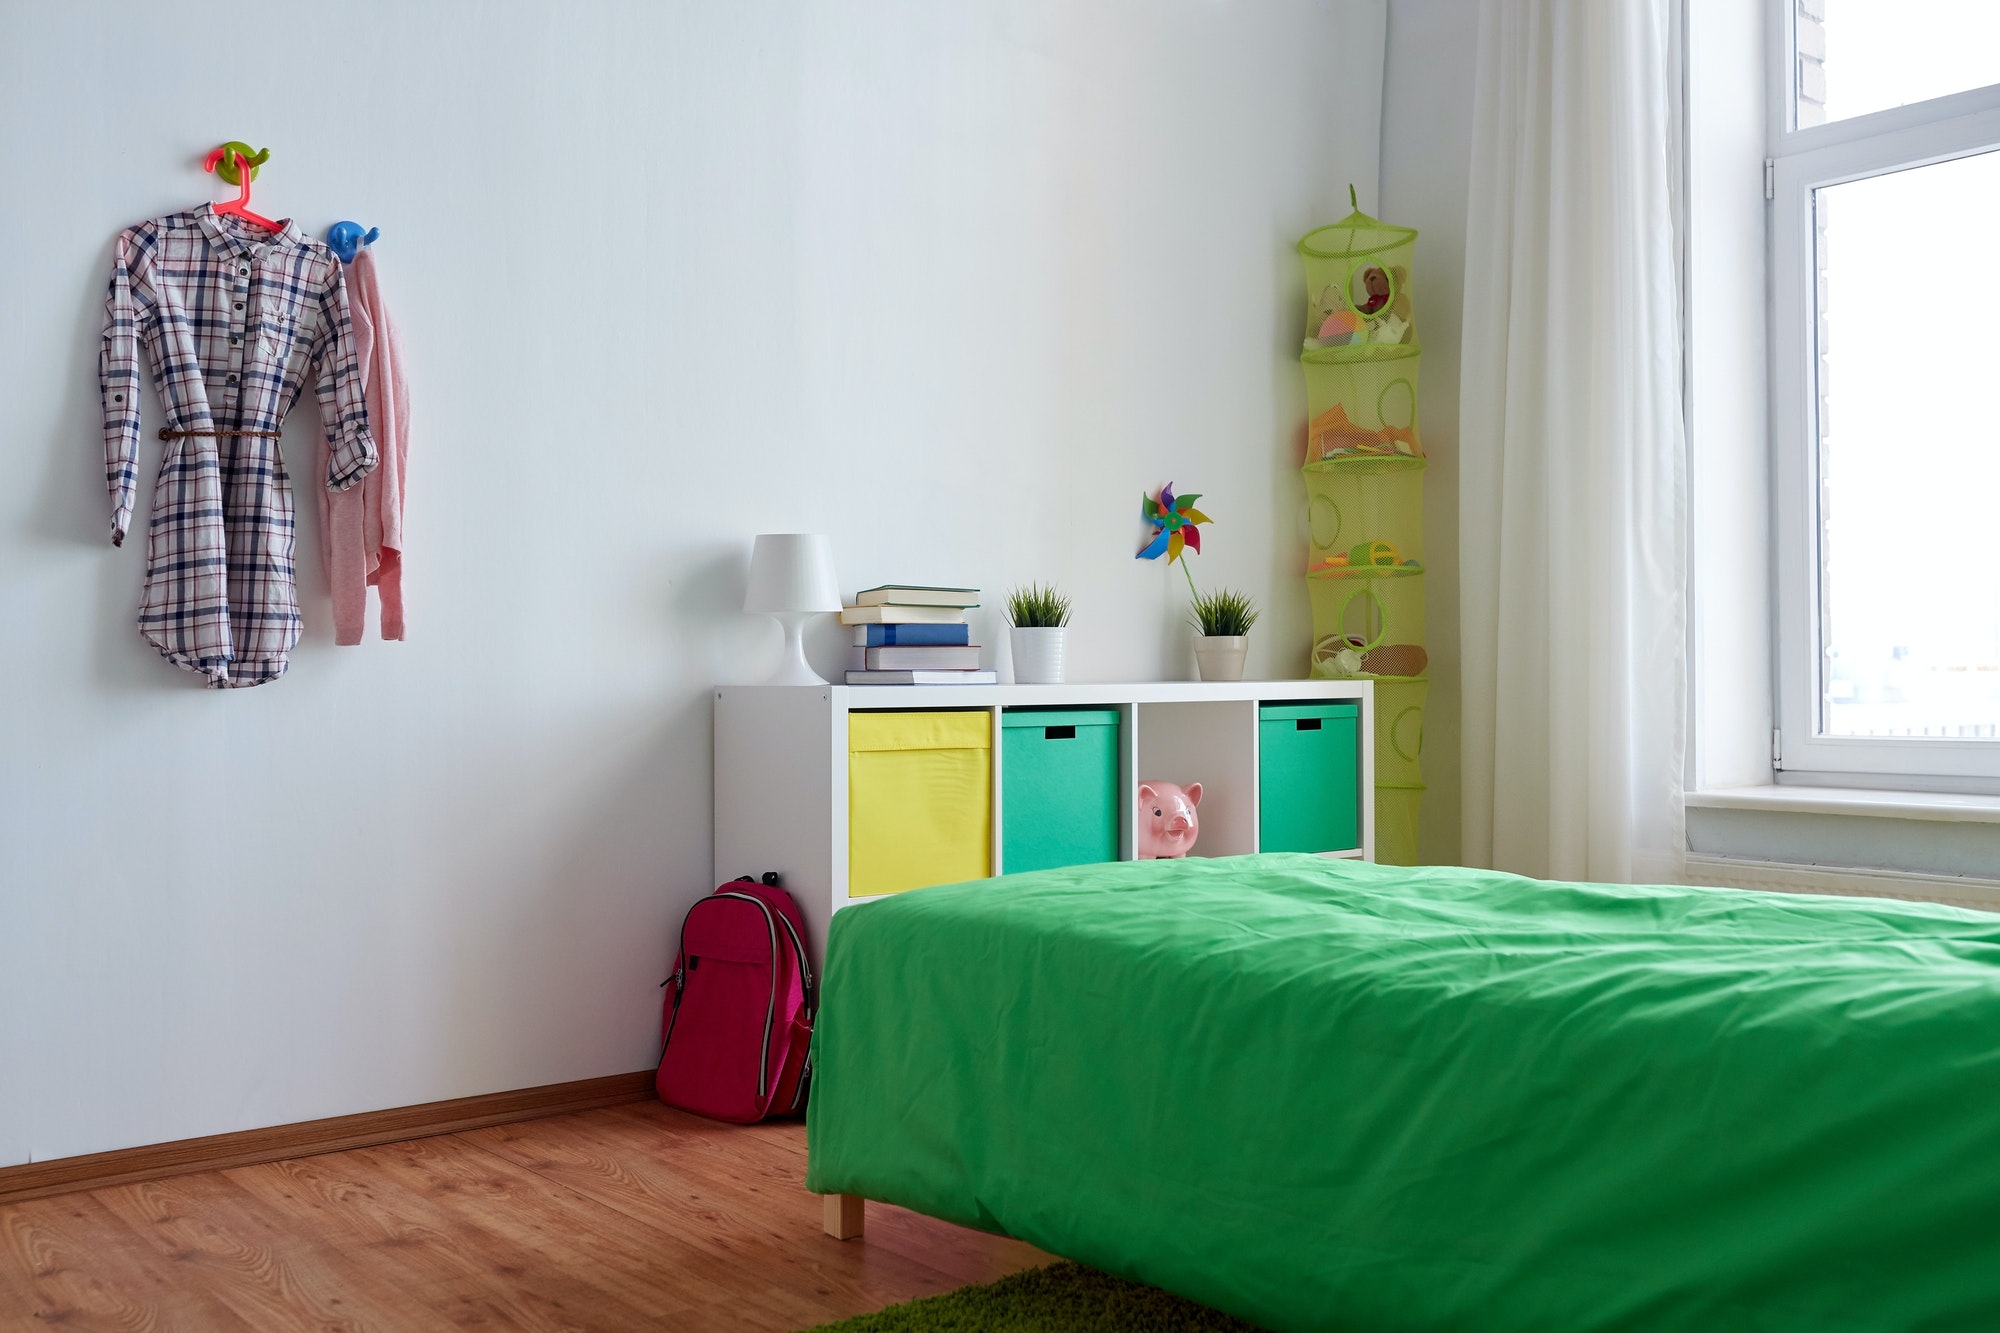 kids room interior with bed, rack and accessories